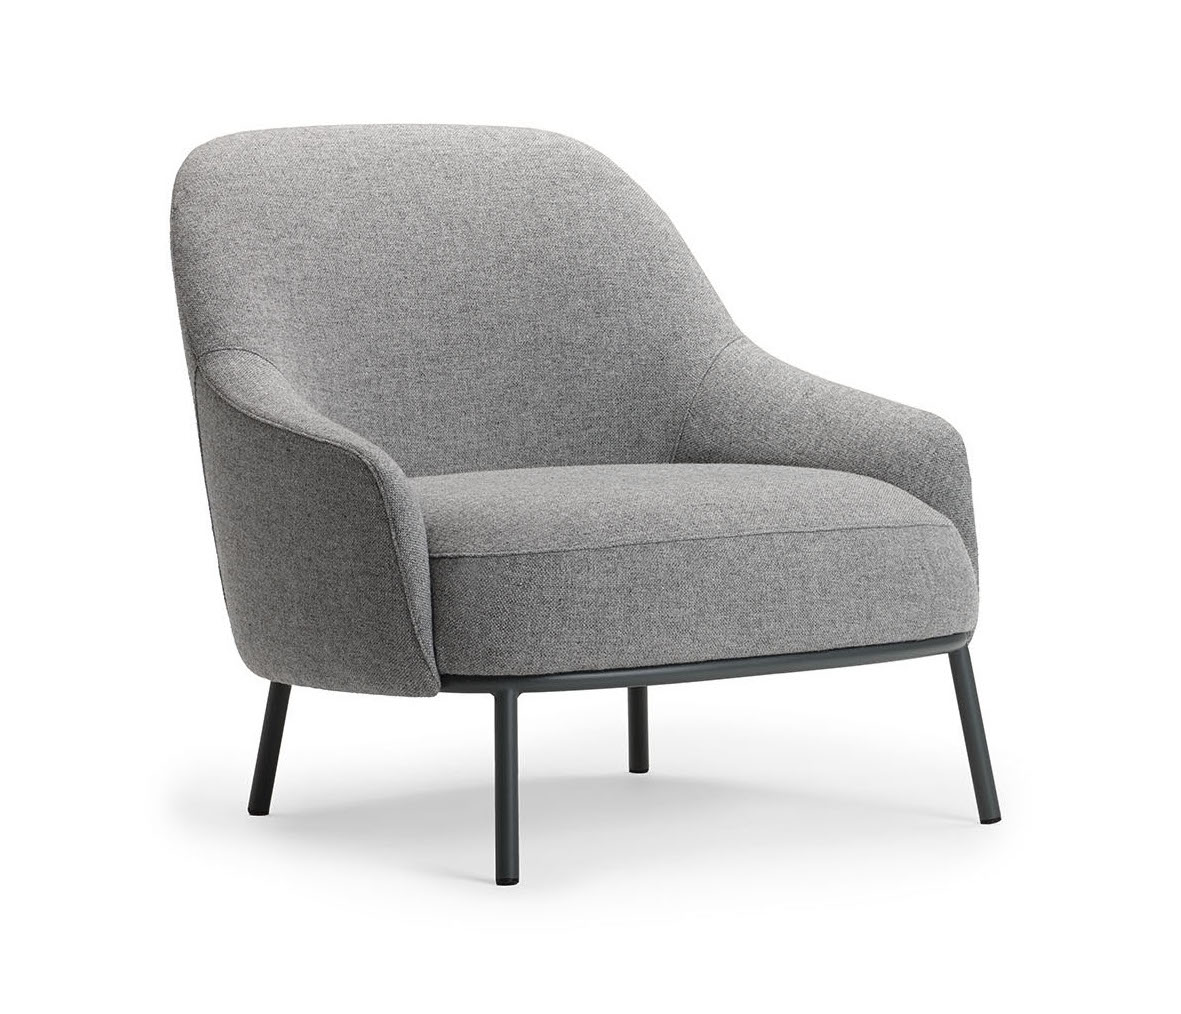 Shift easychair classic by Debiasi Sandri for Offecct